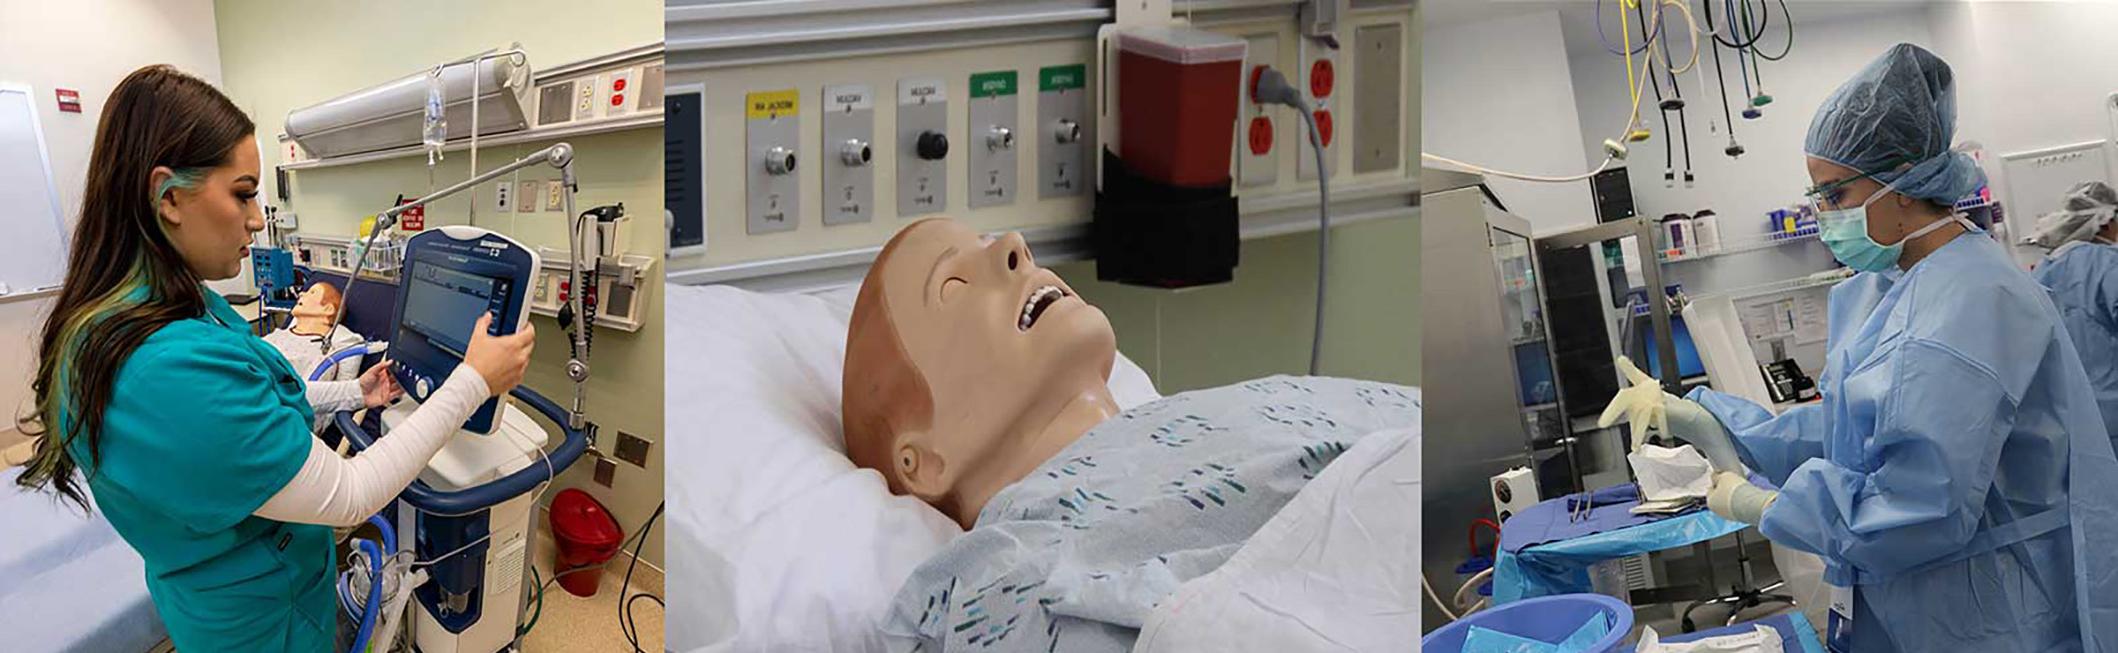 Students working in Simulation Lab and manikin lying in hospital bed.